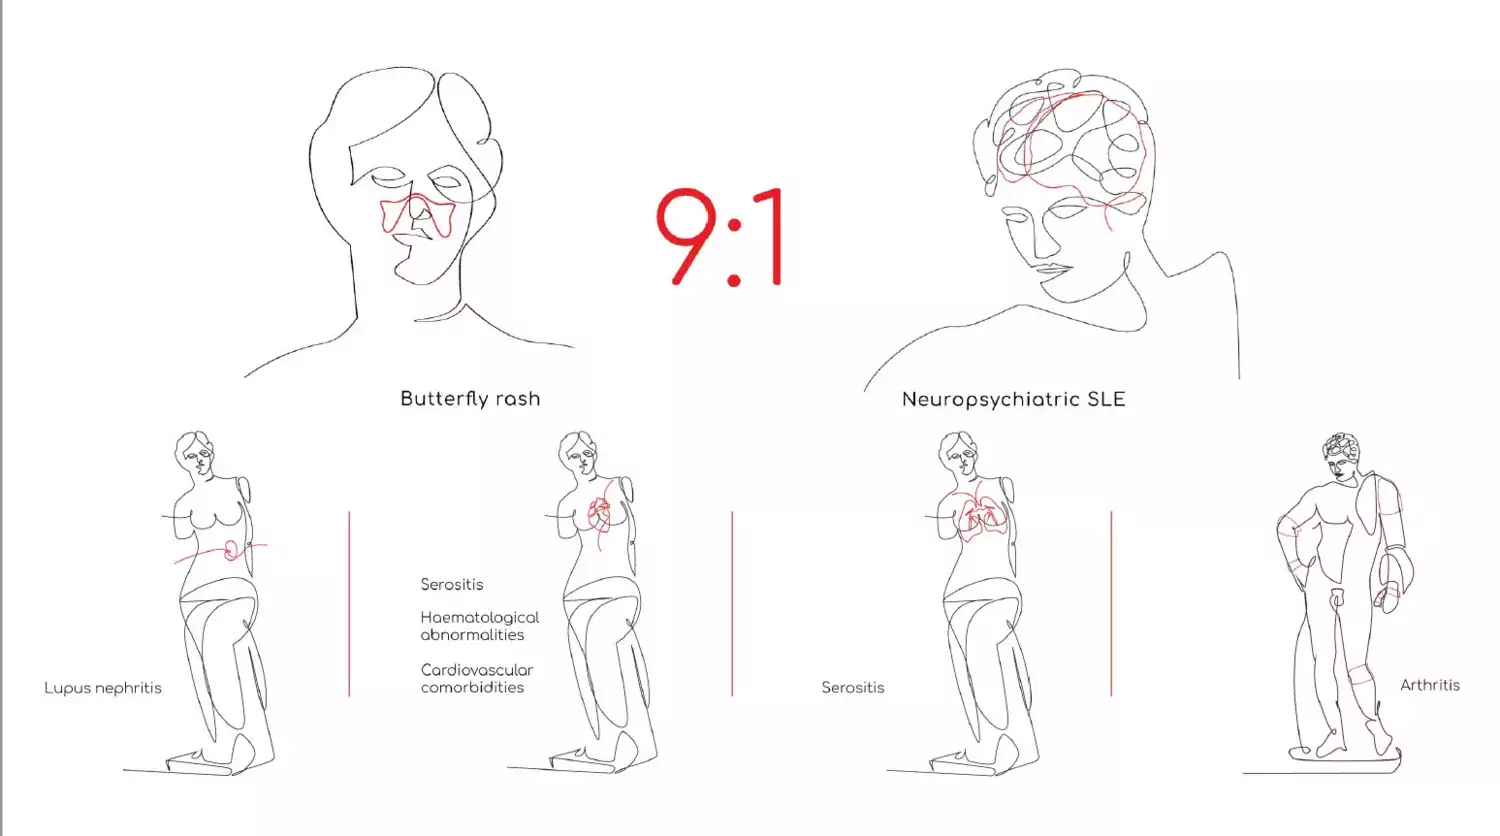 The illustration depicts some of the manifestations of systemic lupus erythematosus.